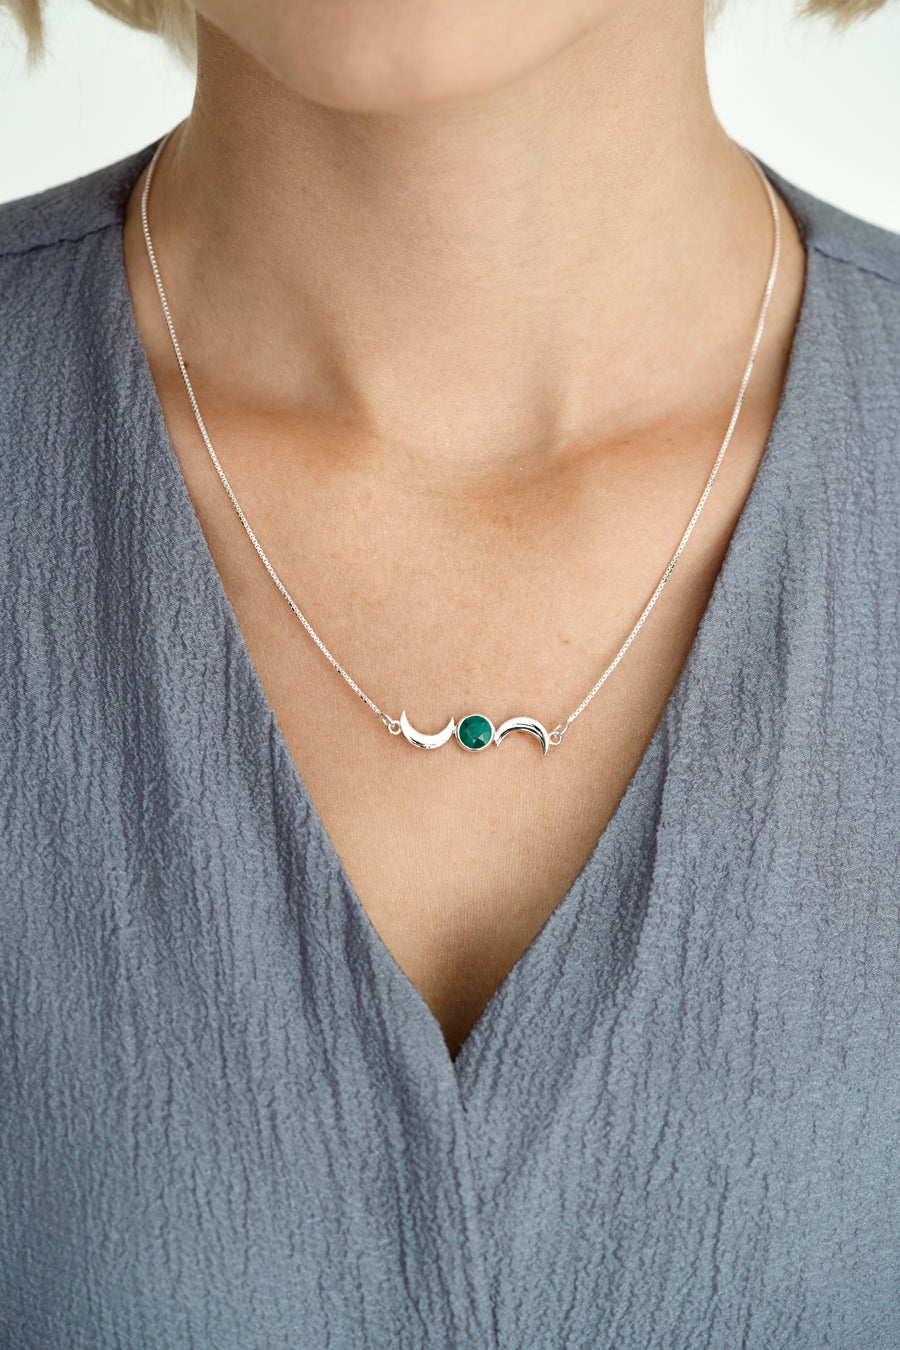 Emerald double moon necklace